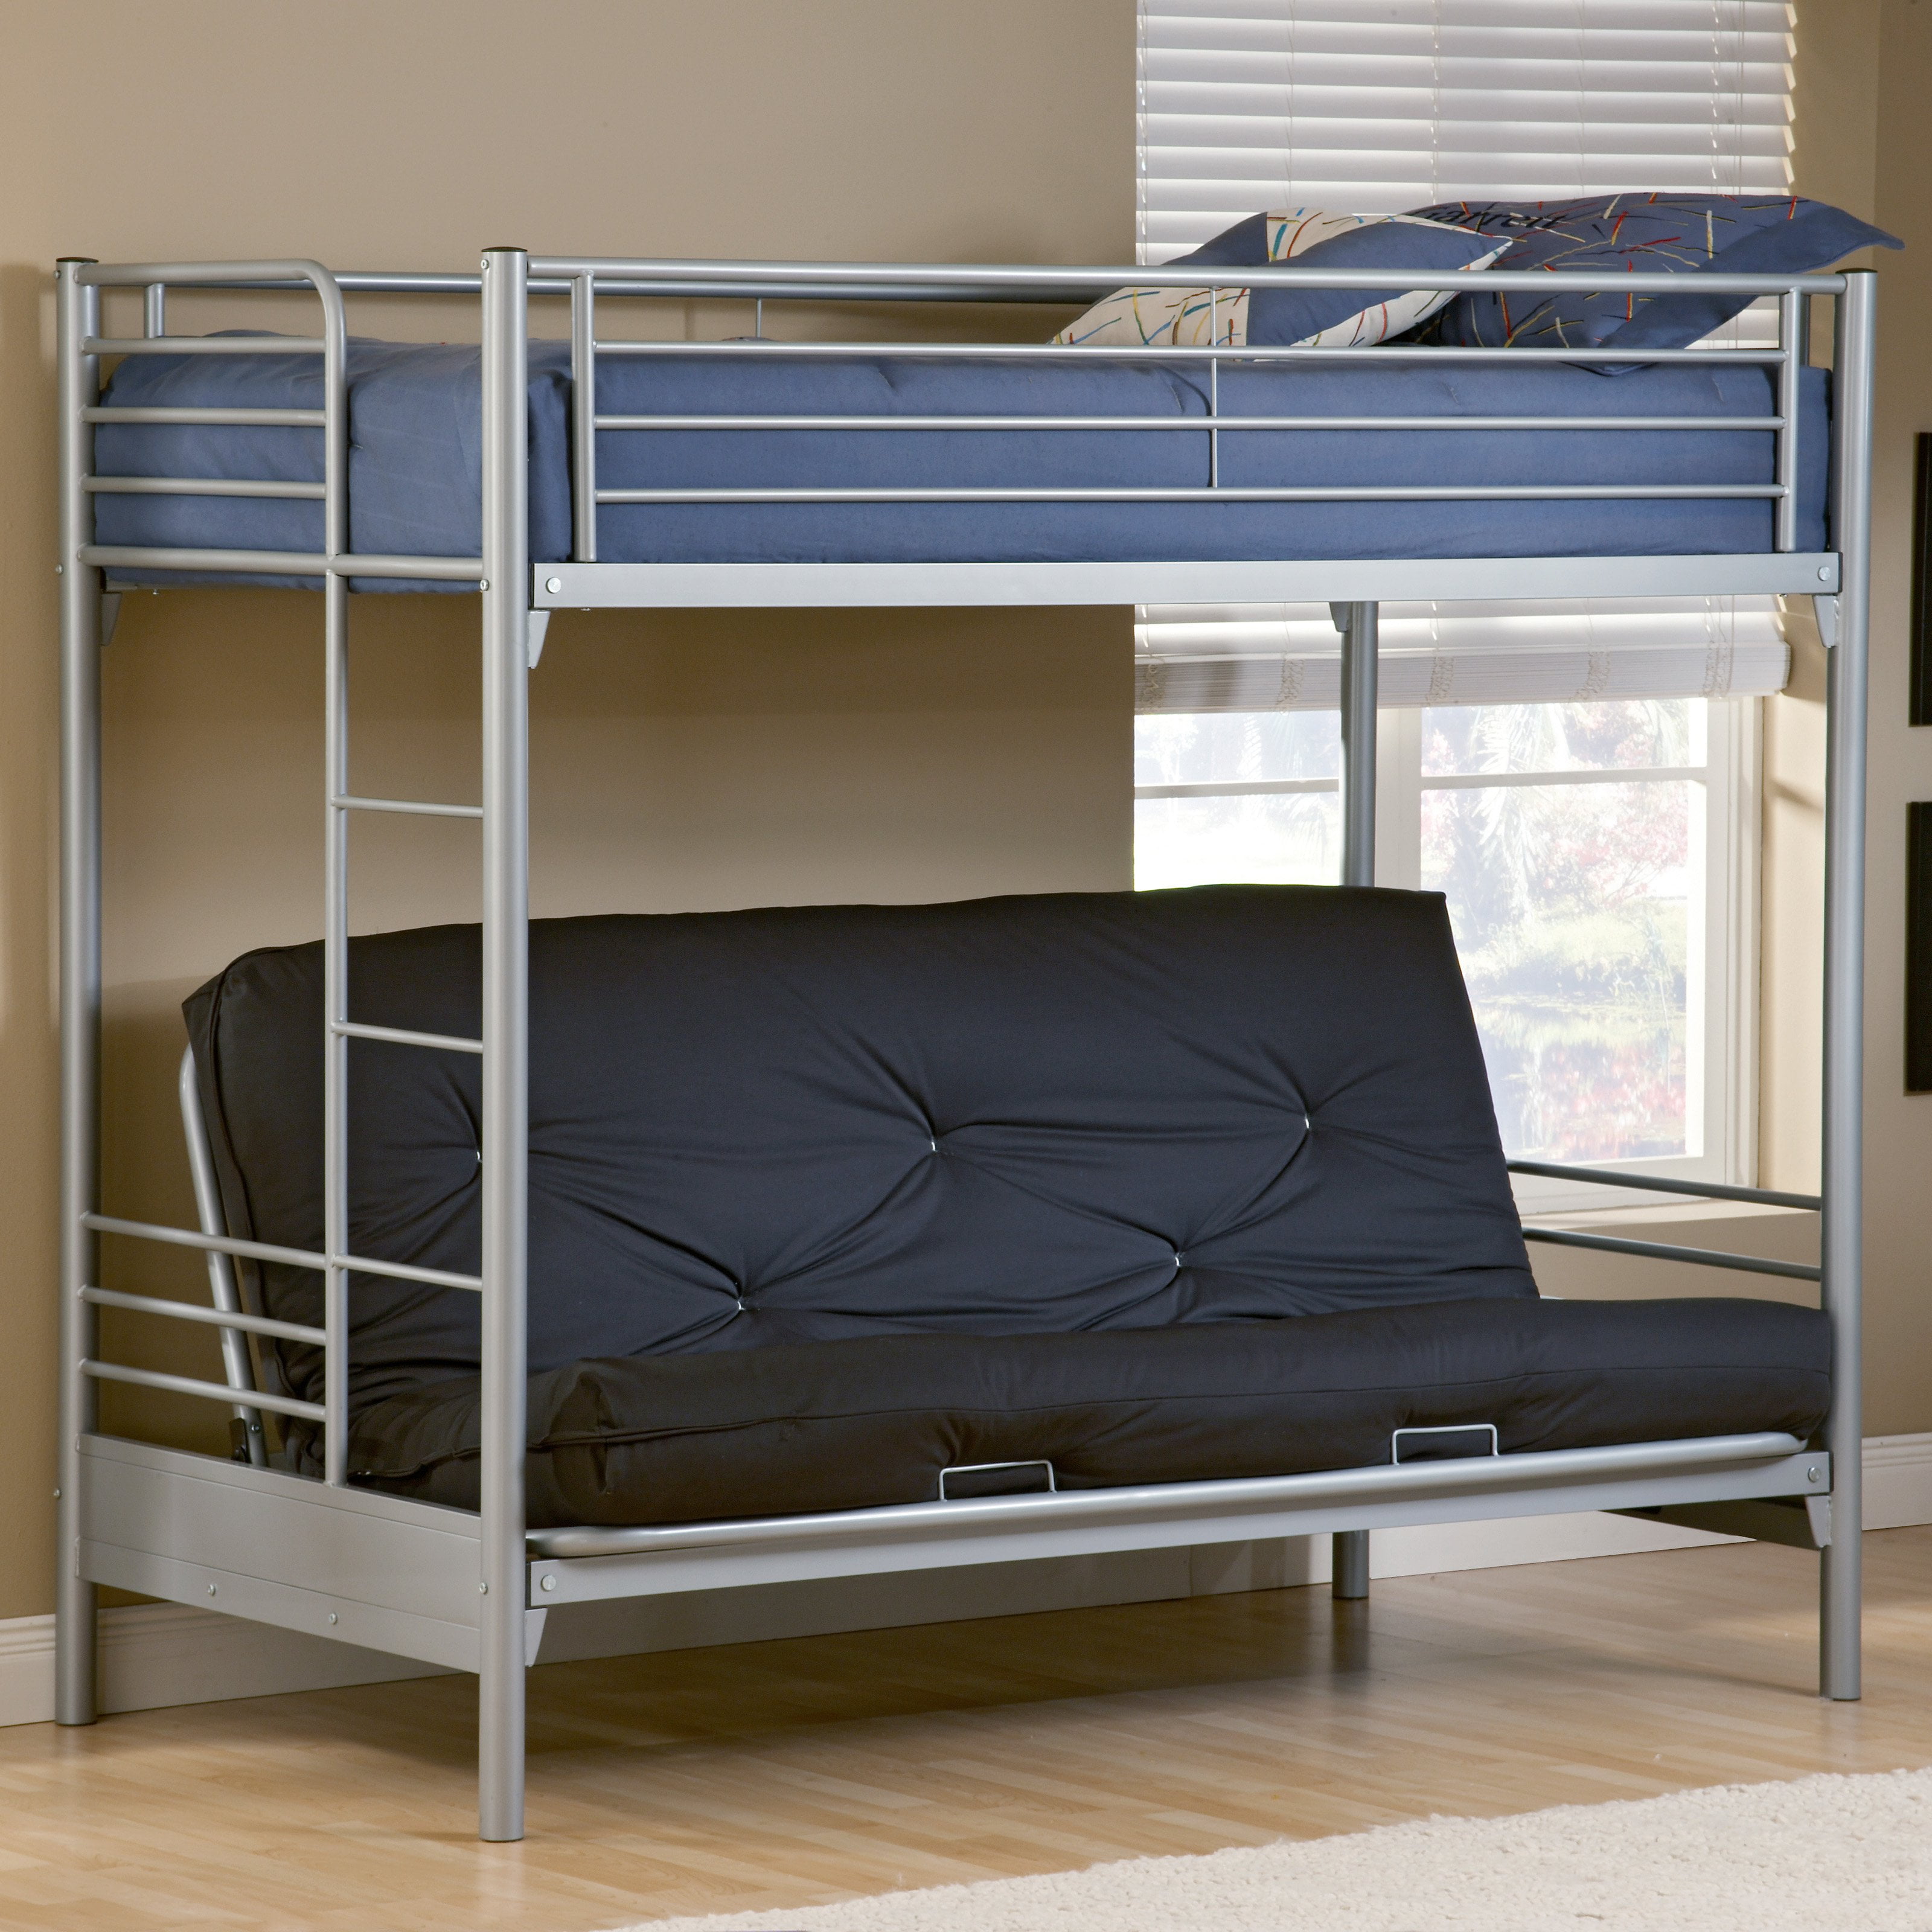 Universal Twin Over Futon Bunk Bed, Bunk Bed With Futon And Mattress